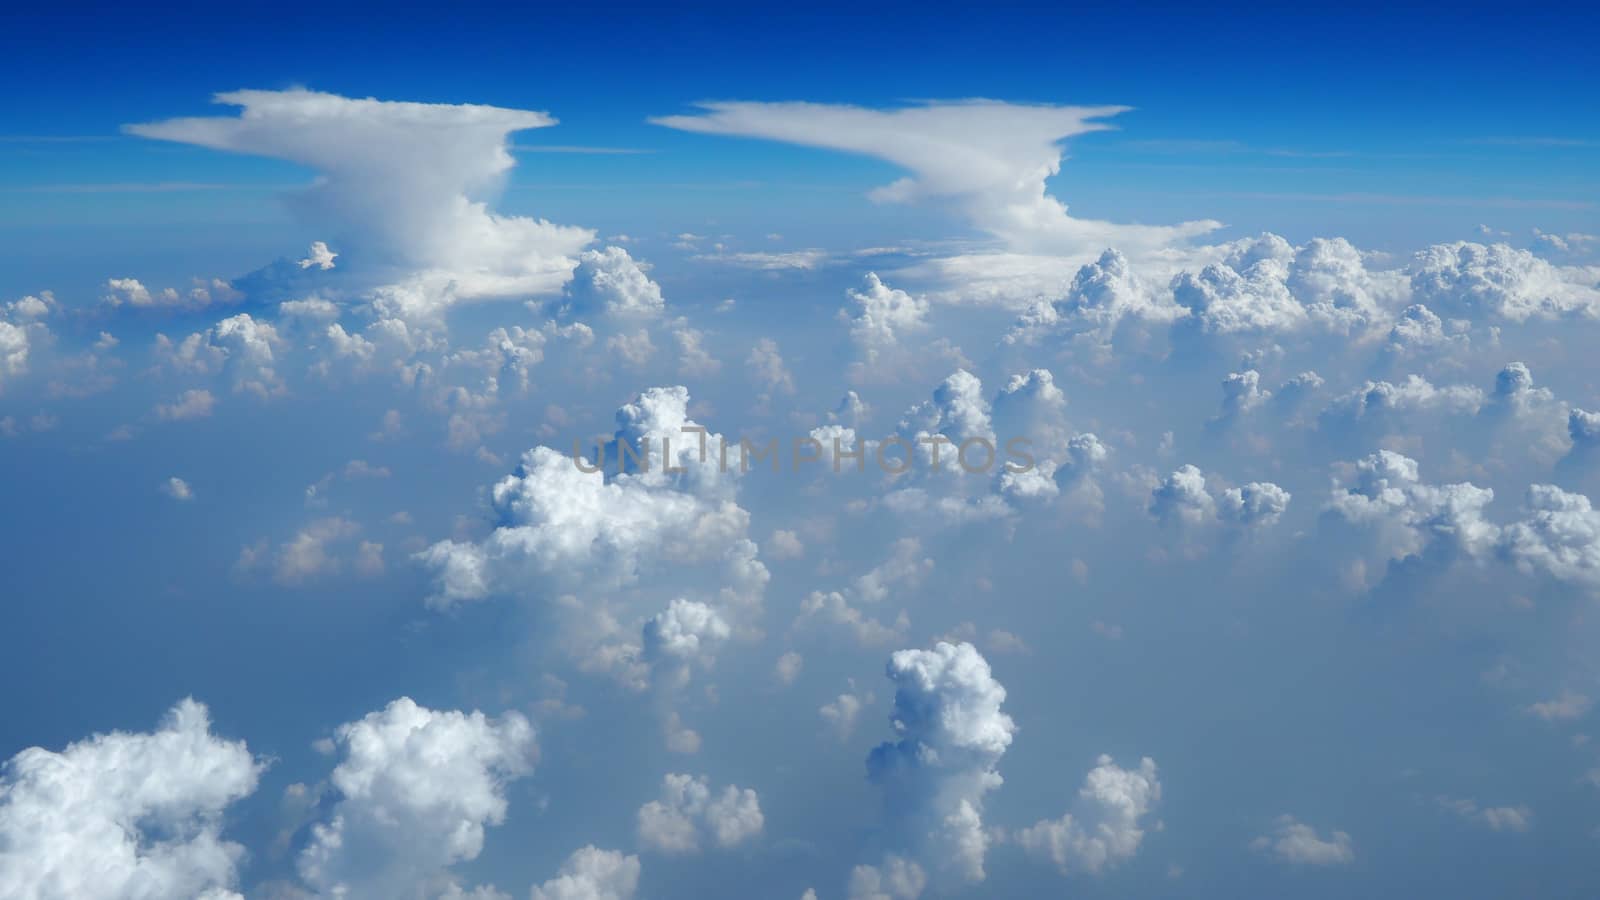 White clouds on the blue sky from airplane view.